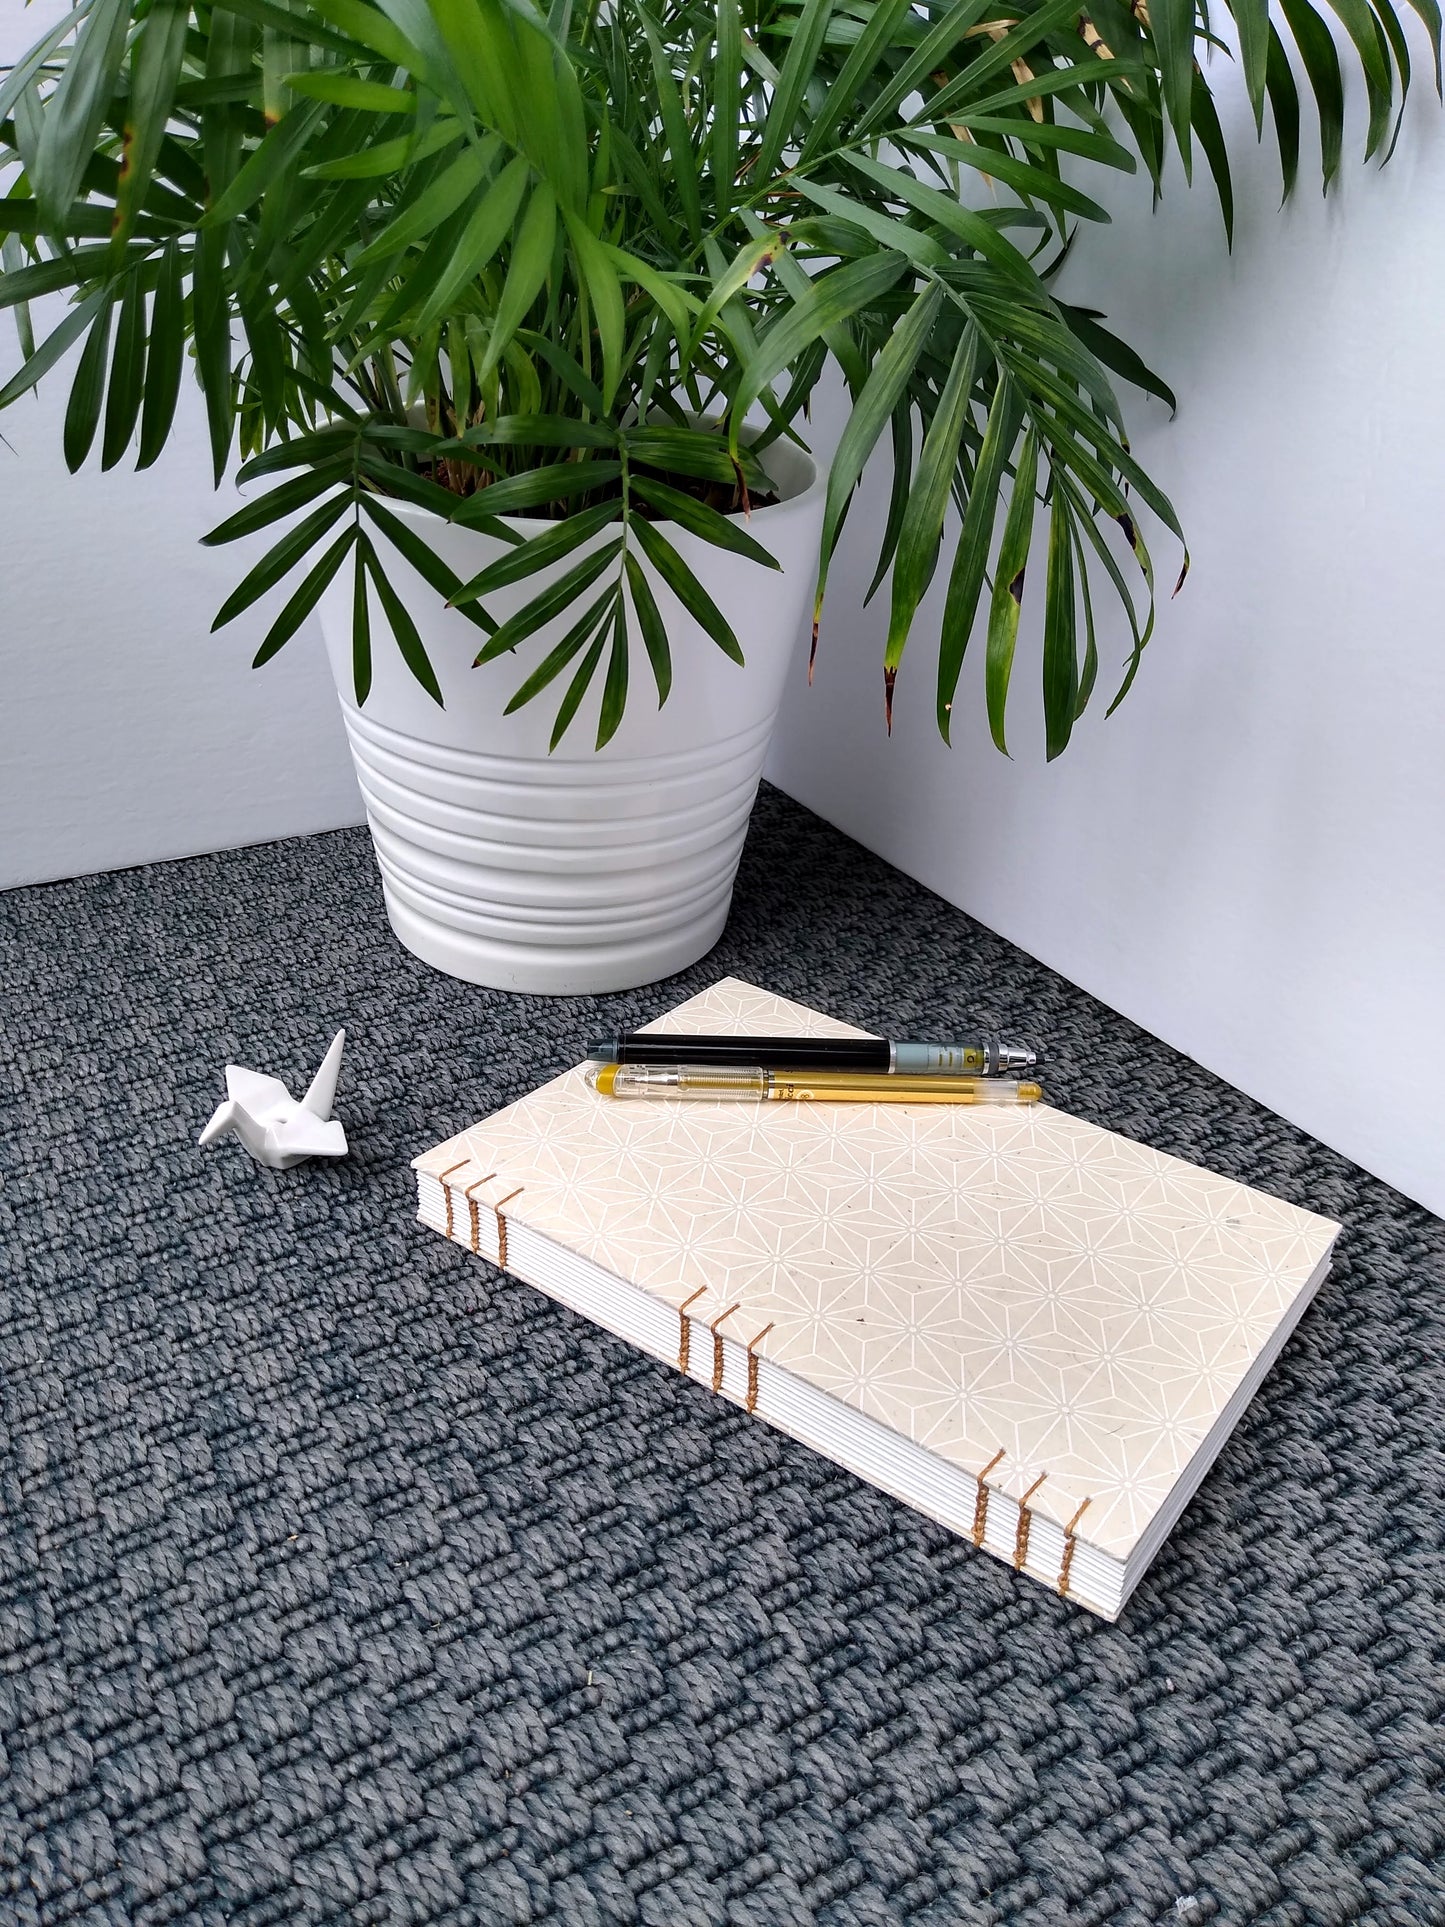 A handmade journal laying on a grey carpet beside a potted plant, and a ceramic crane. There is a gold pen and a black mechanical pencil on top of the journal. The cover of the journal is cream with a white asanoha pattern on it. The journal is turned to show the brown stitching along the spine, holding everything together.